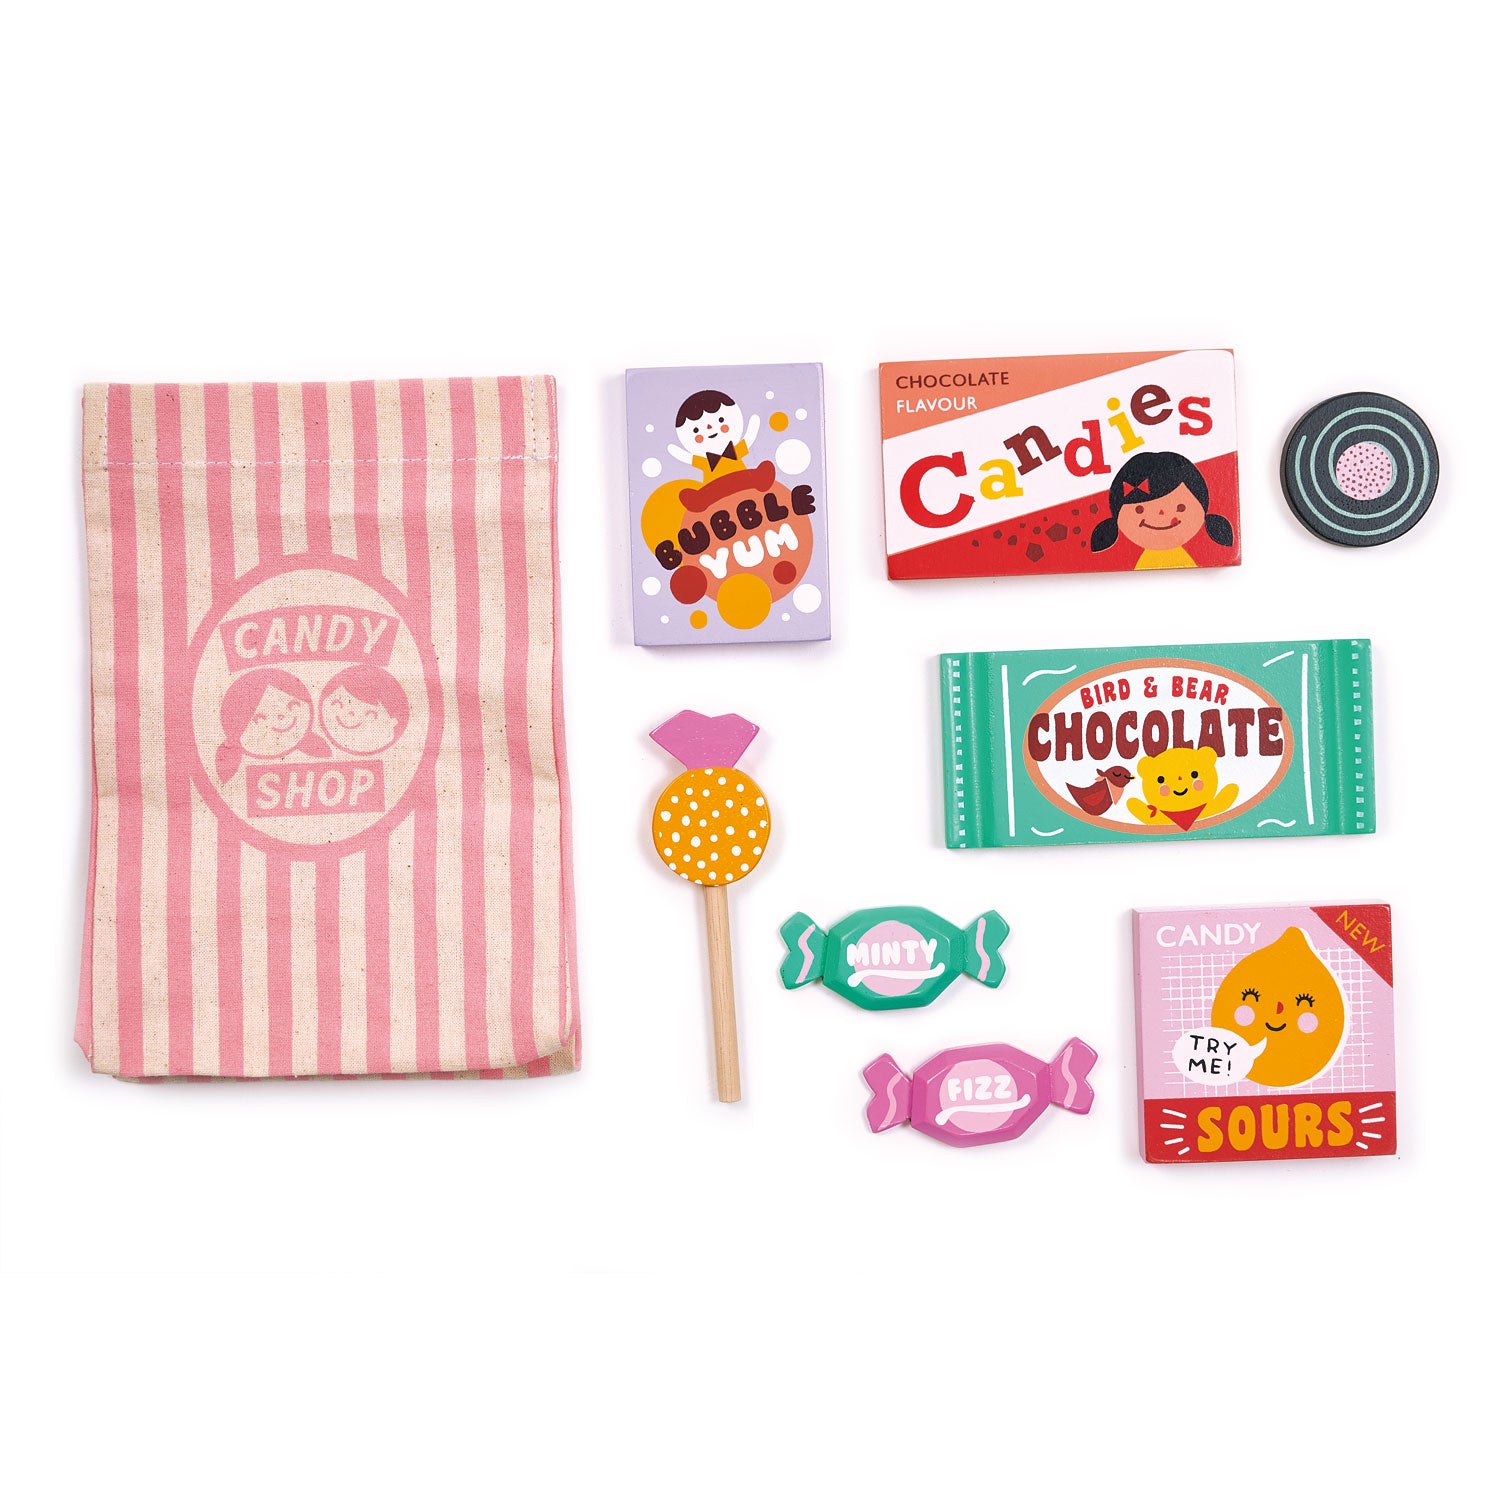 Contents of wooden toy candy shop bag laid out.  Included is a lolly pop, two small sweets, liquorice wheel, bubble gum pack, chocolate flavoured candies, chocolate bar, and a box of candy sours with a fabric sweets bag. 